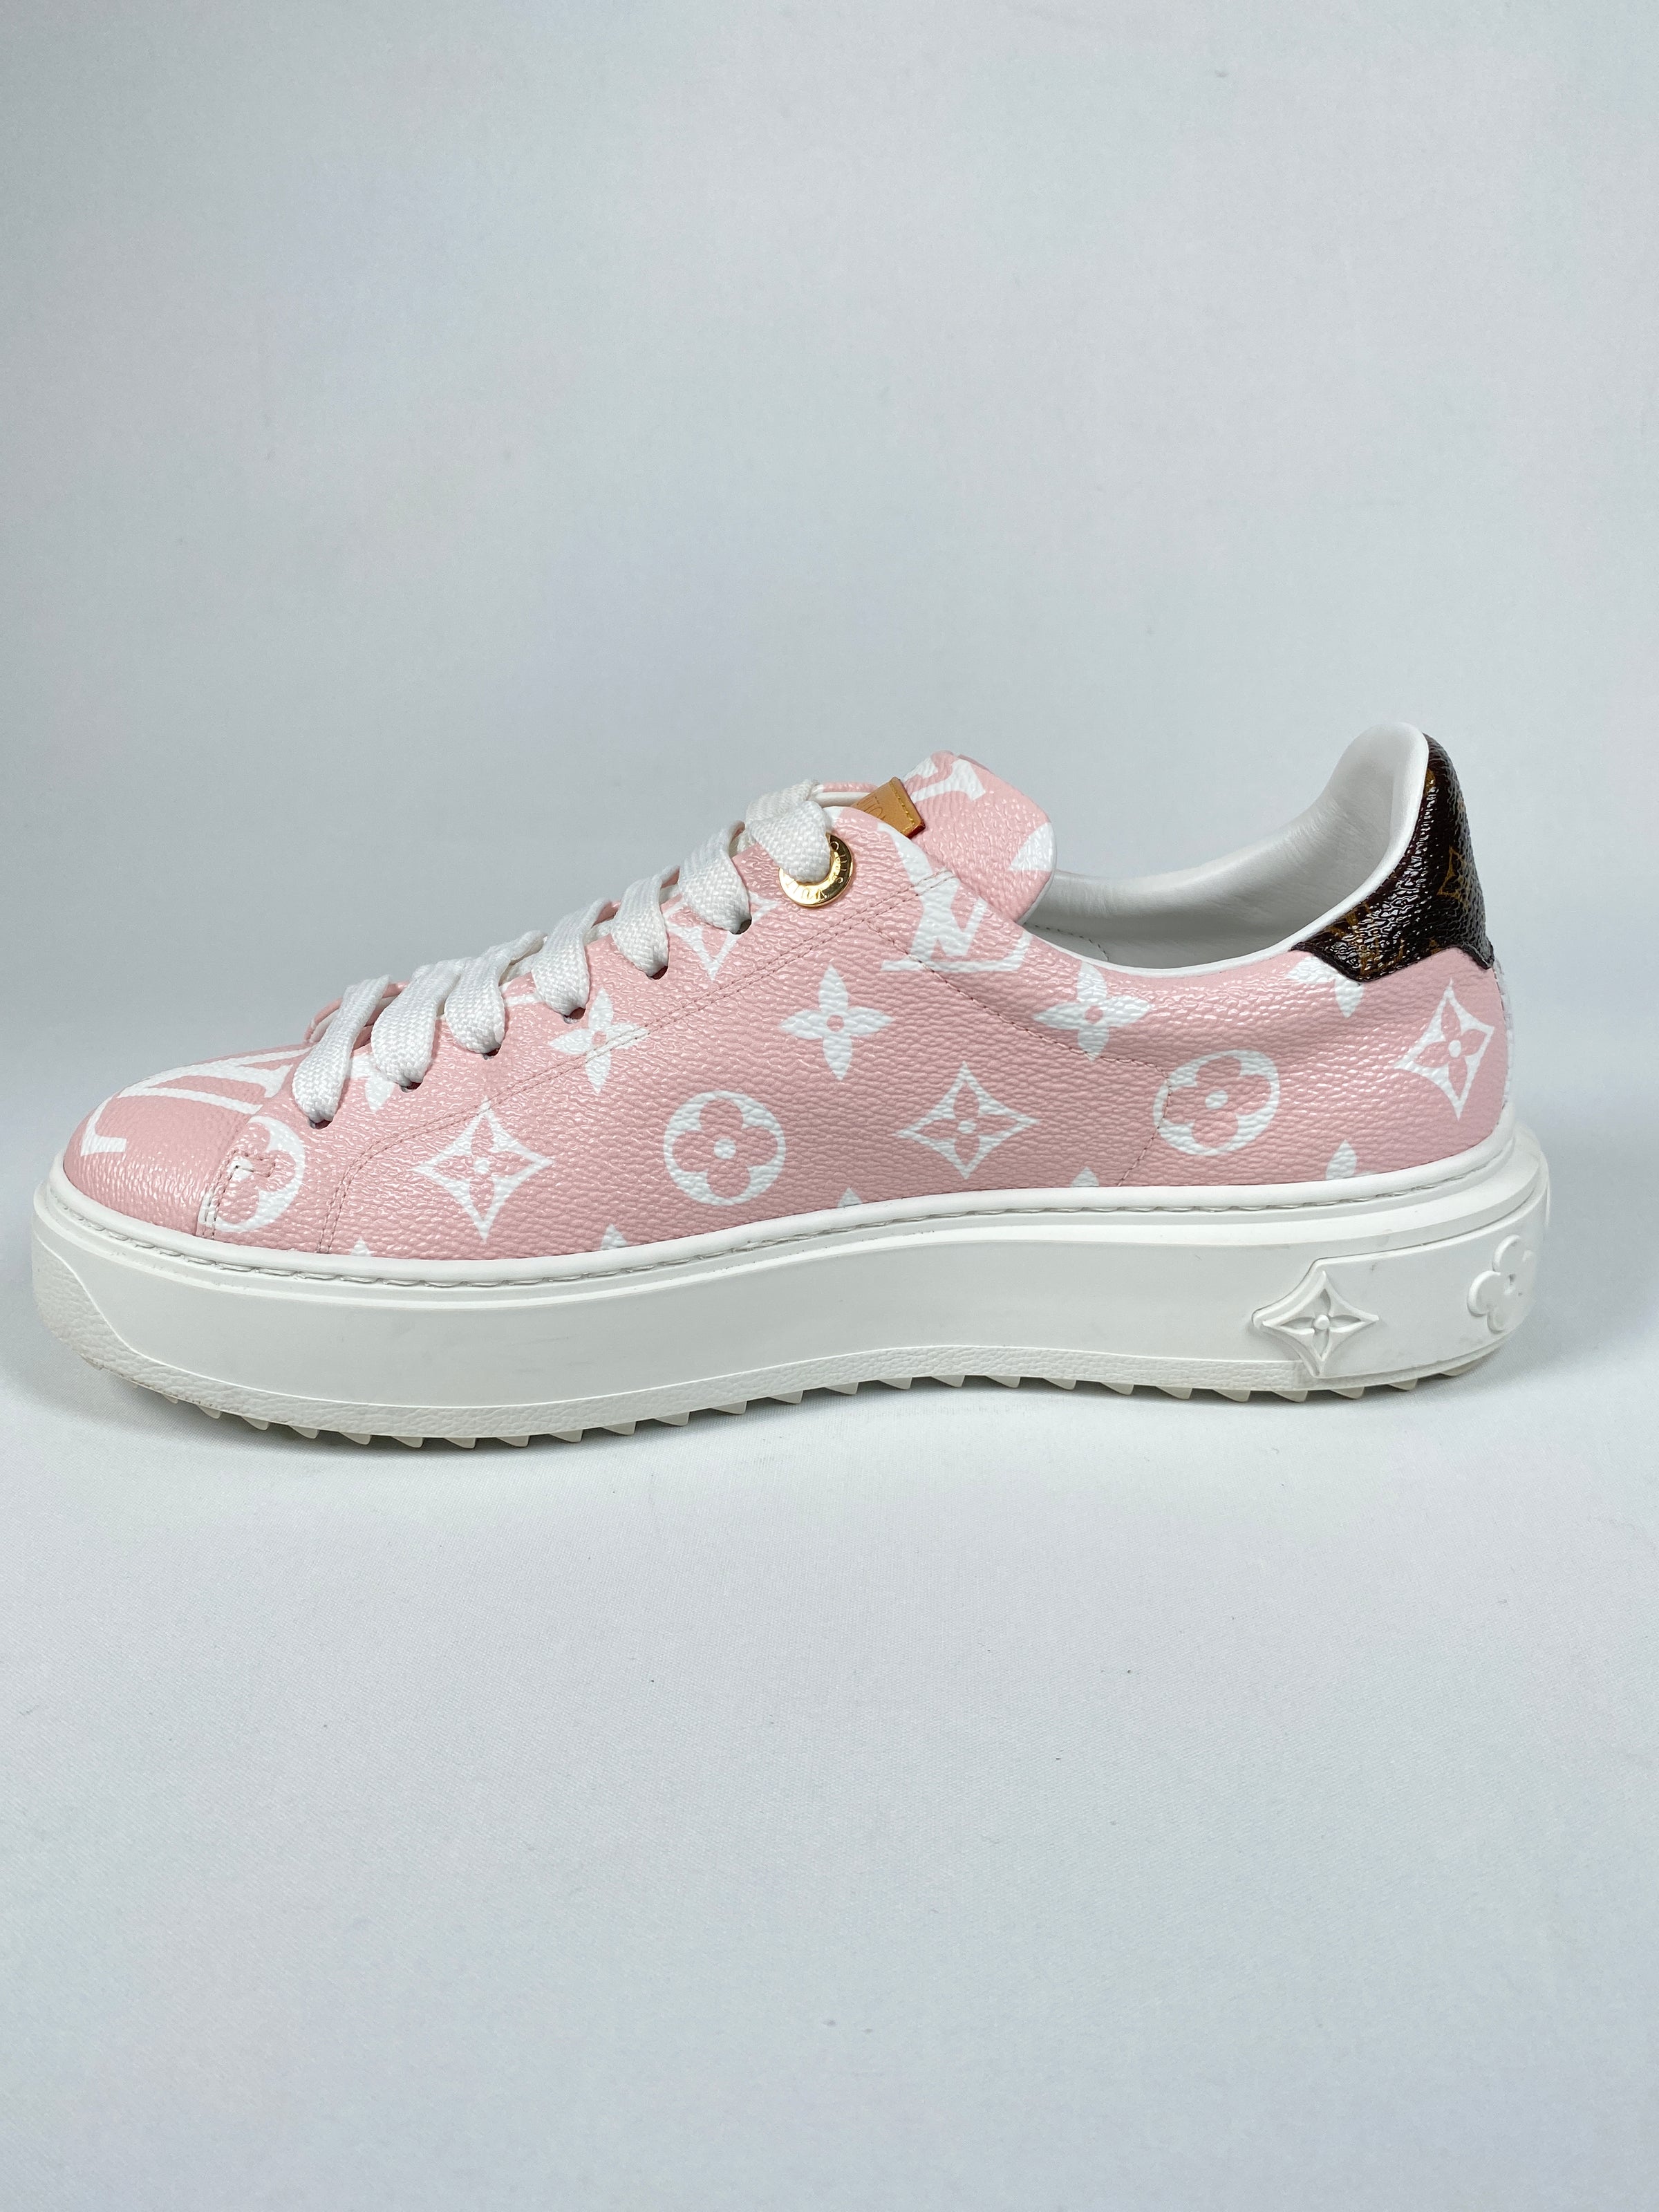 Louis Vuitton - Authenticated Time Out Trainer - Leather Pink for Women, Very Good Condition